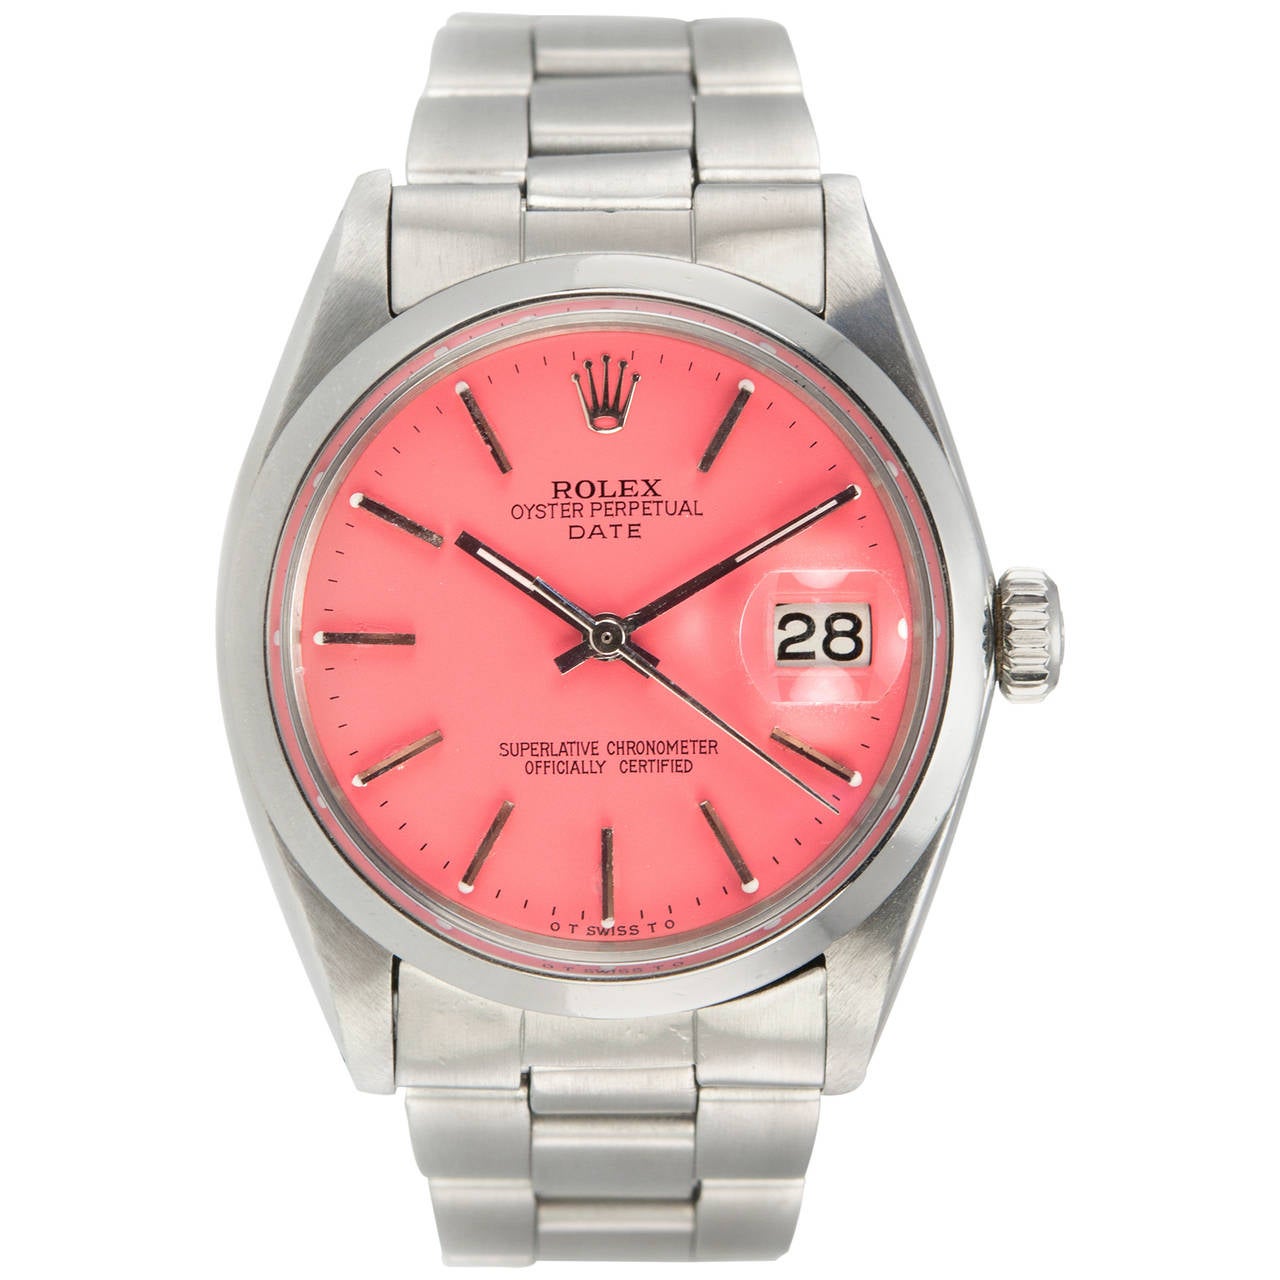 Rolex Stainless Steel Date Custom Pink Dial Wristwatch Ref 1500 For Sale